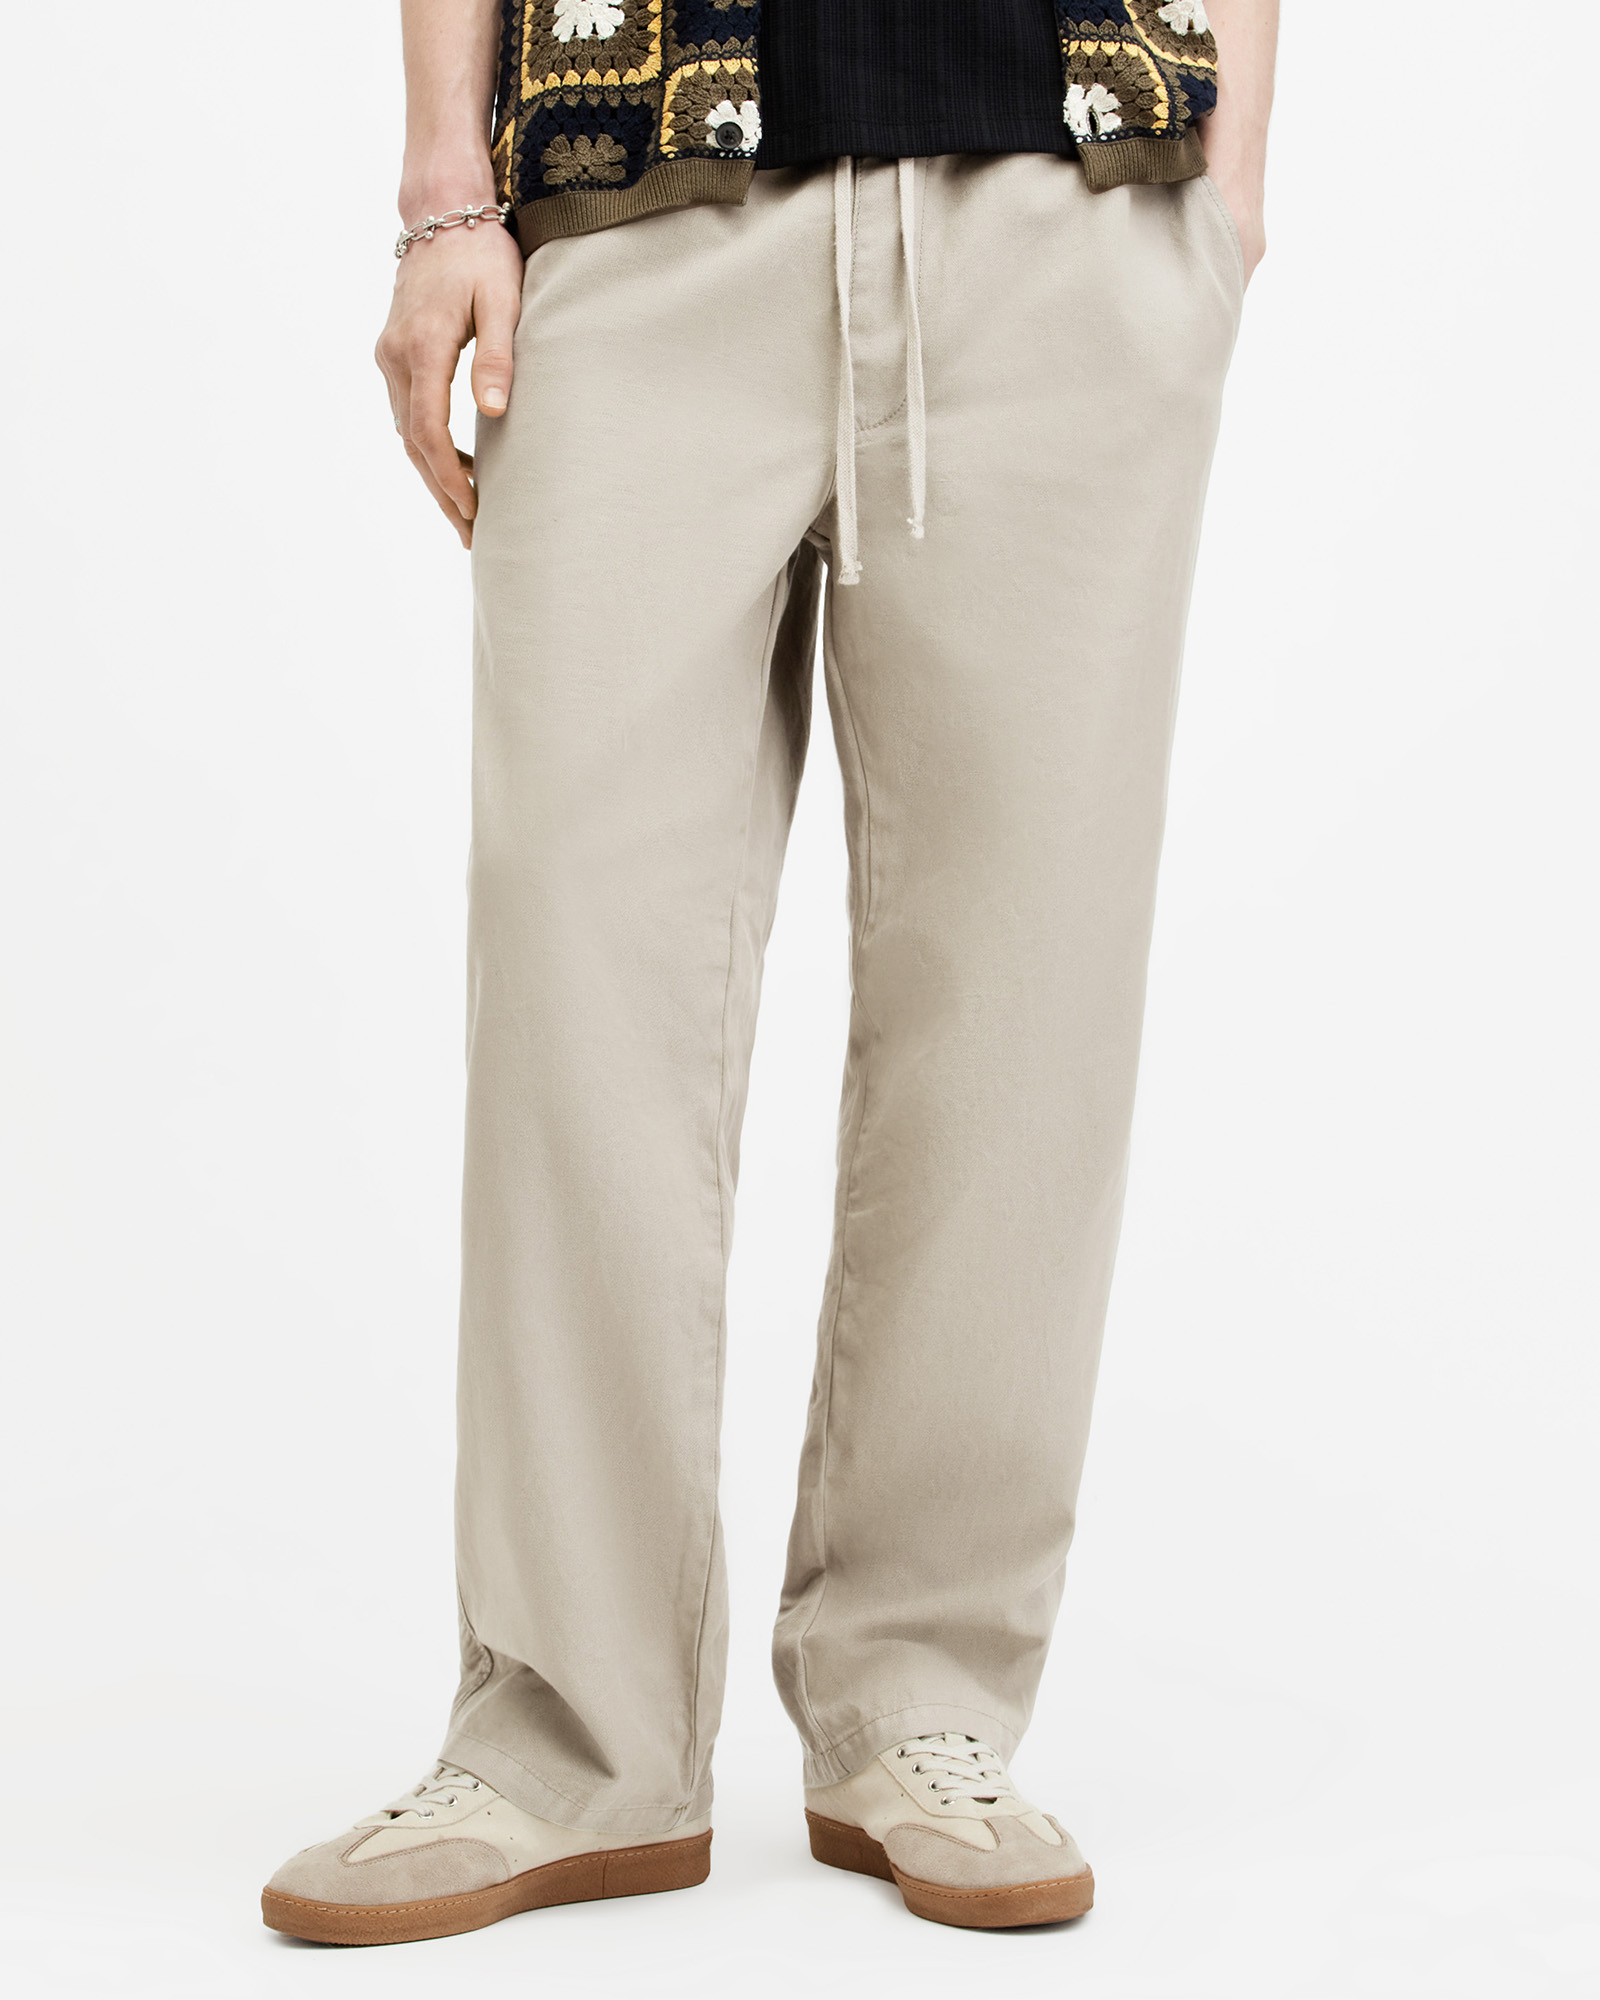 AllSaints Hanbury Straight Fit Trousers,, Oyster Grey